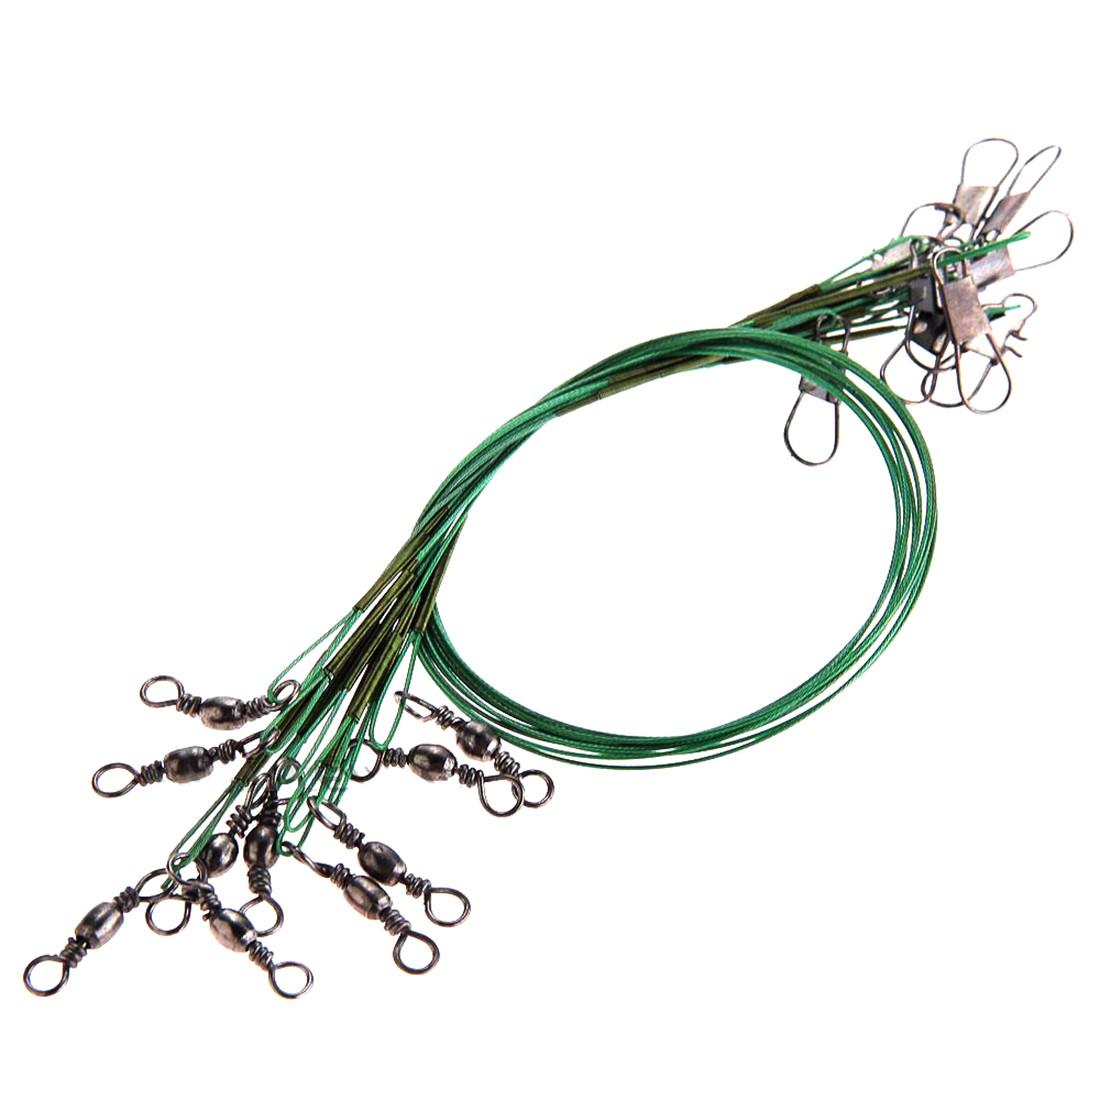 Image of 2016 New Hot Sale High Quality Practical 10pcs 28cm Copper Fishing Leader Wire Fish Tackle Rig Dark Green